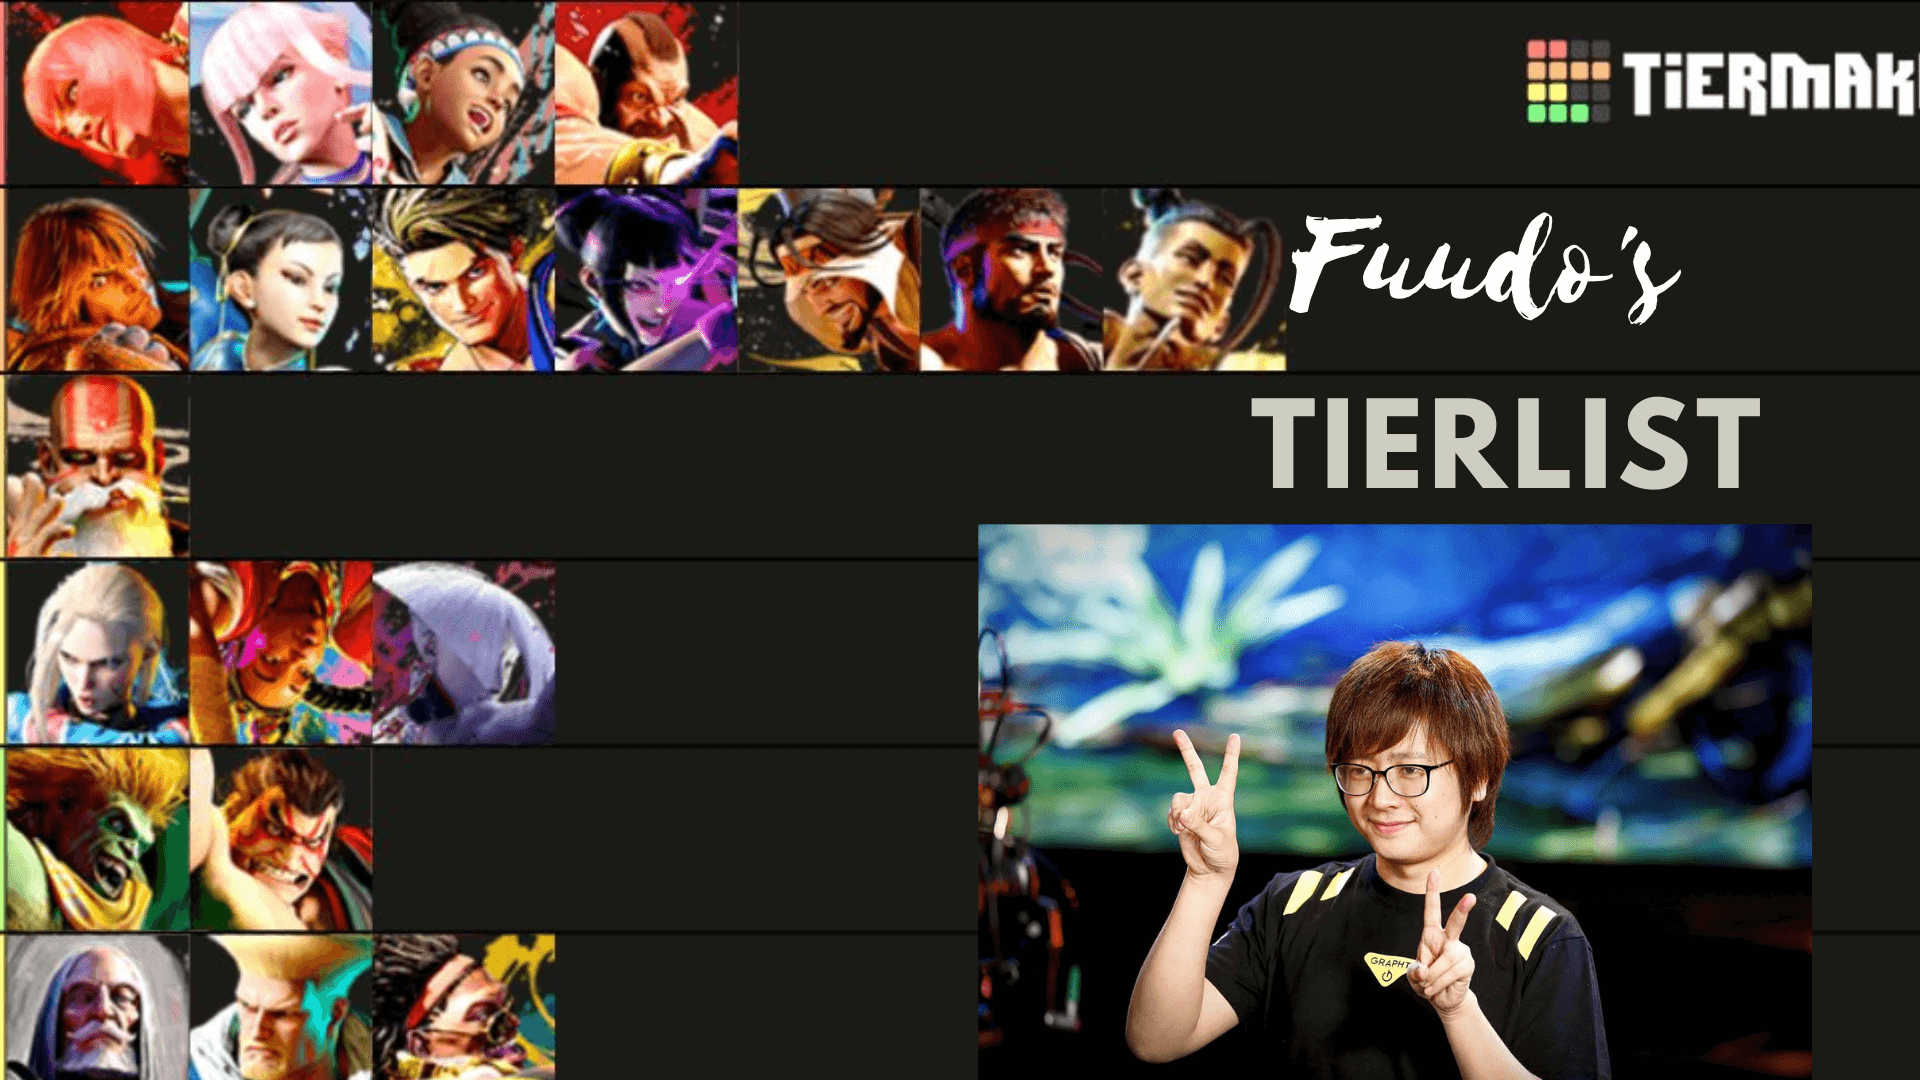 Character difficulty tier list for Street Fighter 6 created by Broski